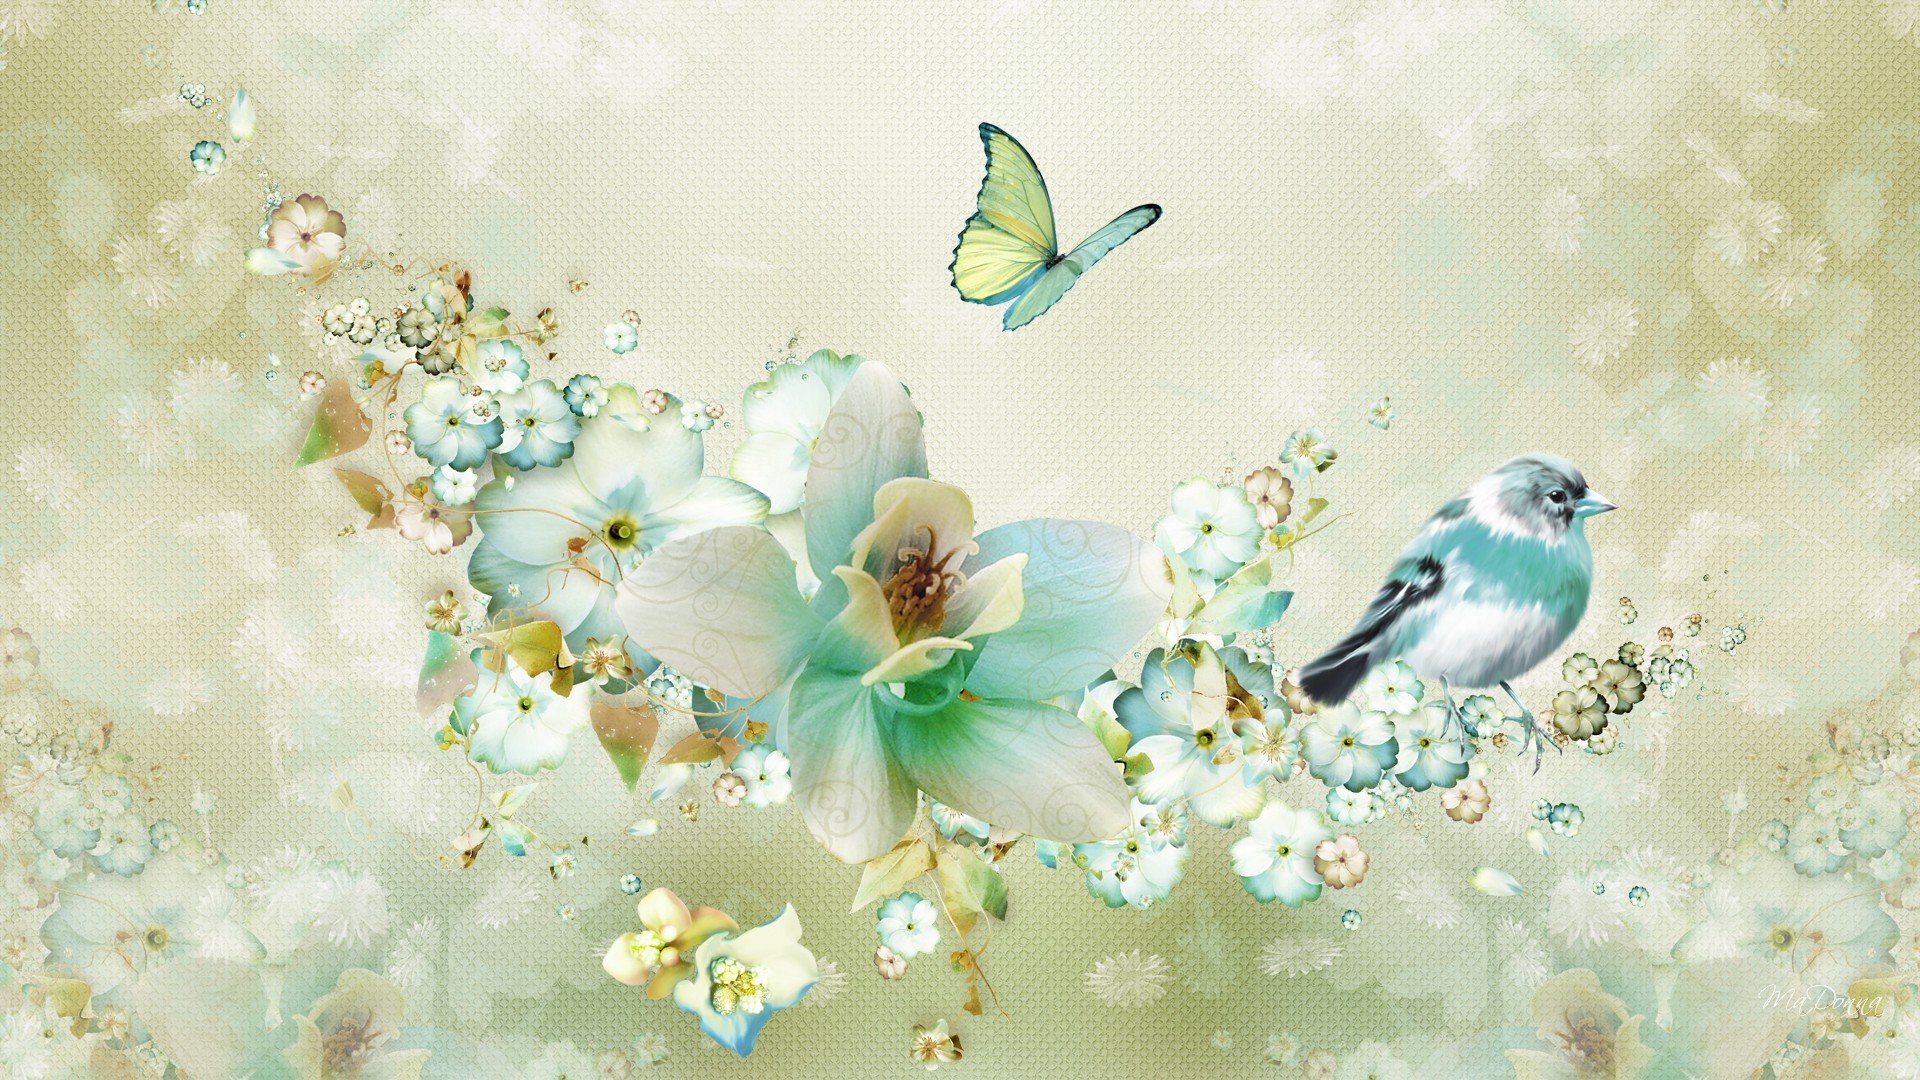 Flowers Birds and Butterfly wallpaper